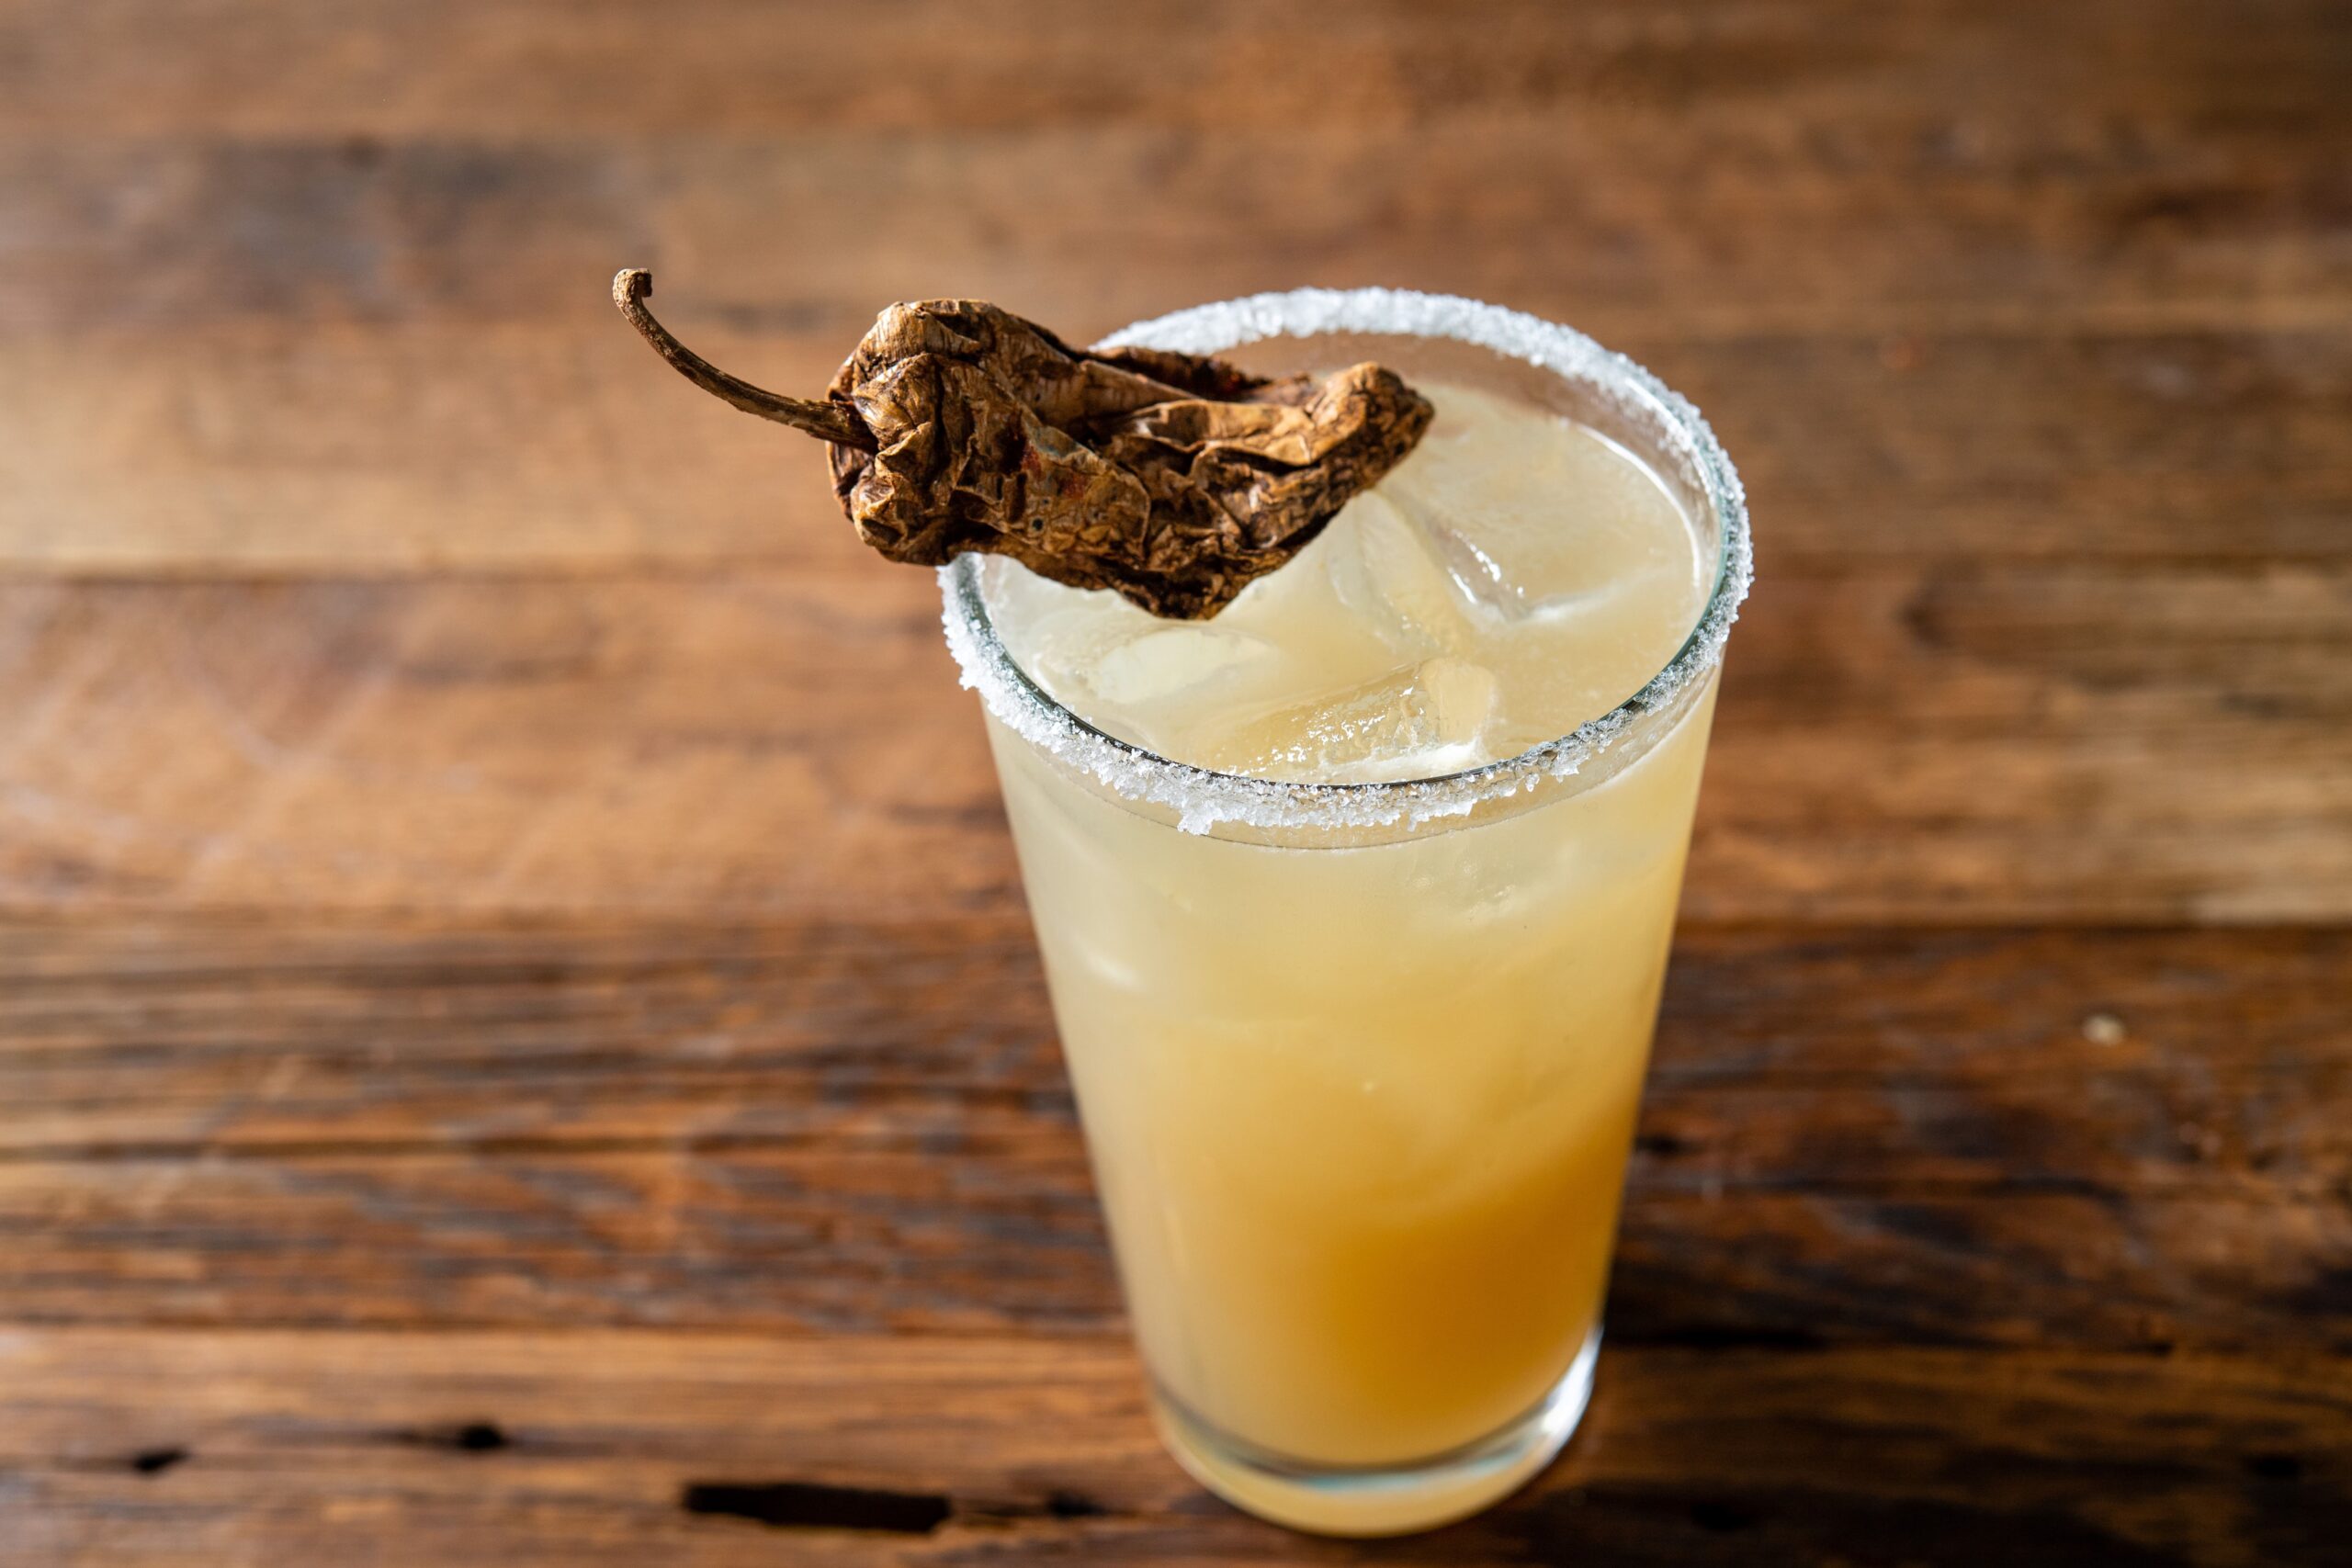 In honor of Tanteo's Spicy Margarita Week, every purchase of Solita’s El Hombre Margarita, featuring Tanteo’s Chipotle Tequila, $1 will be donated to Guide Dogs of America.